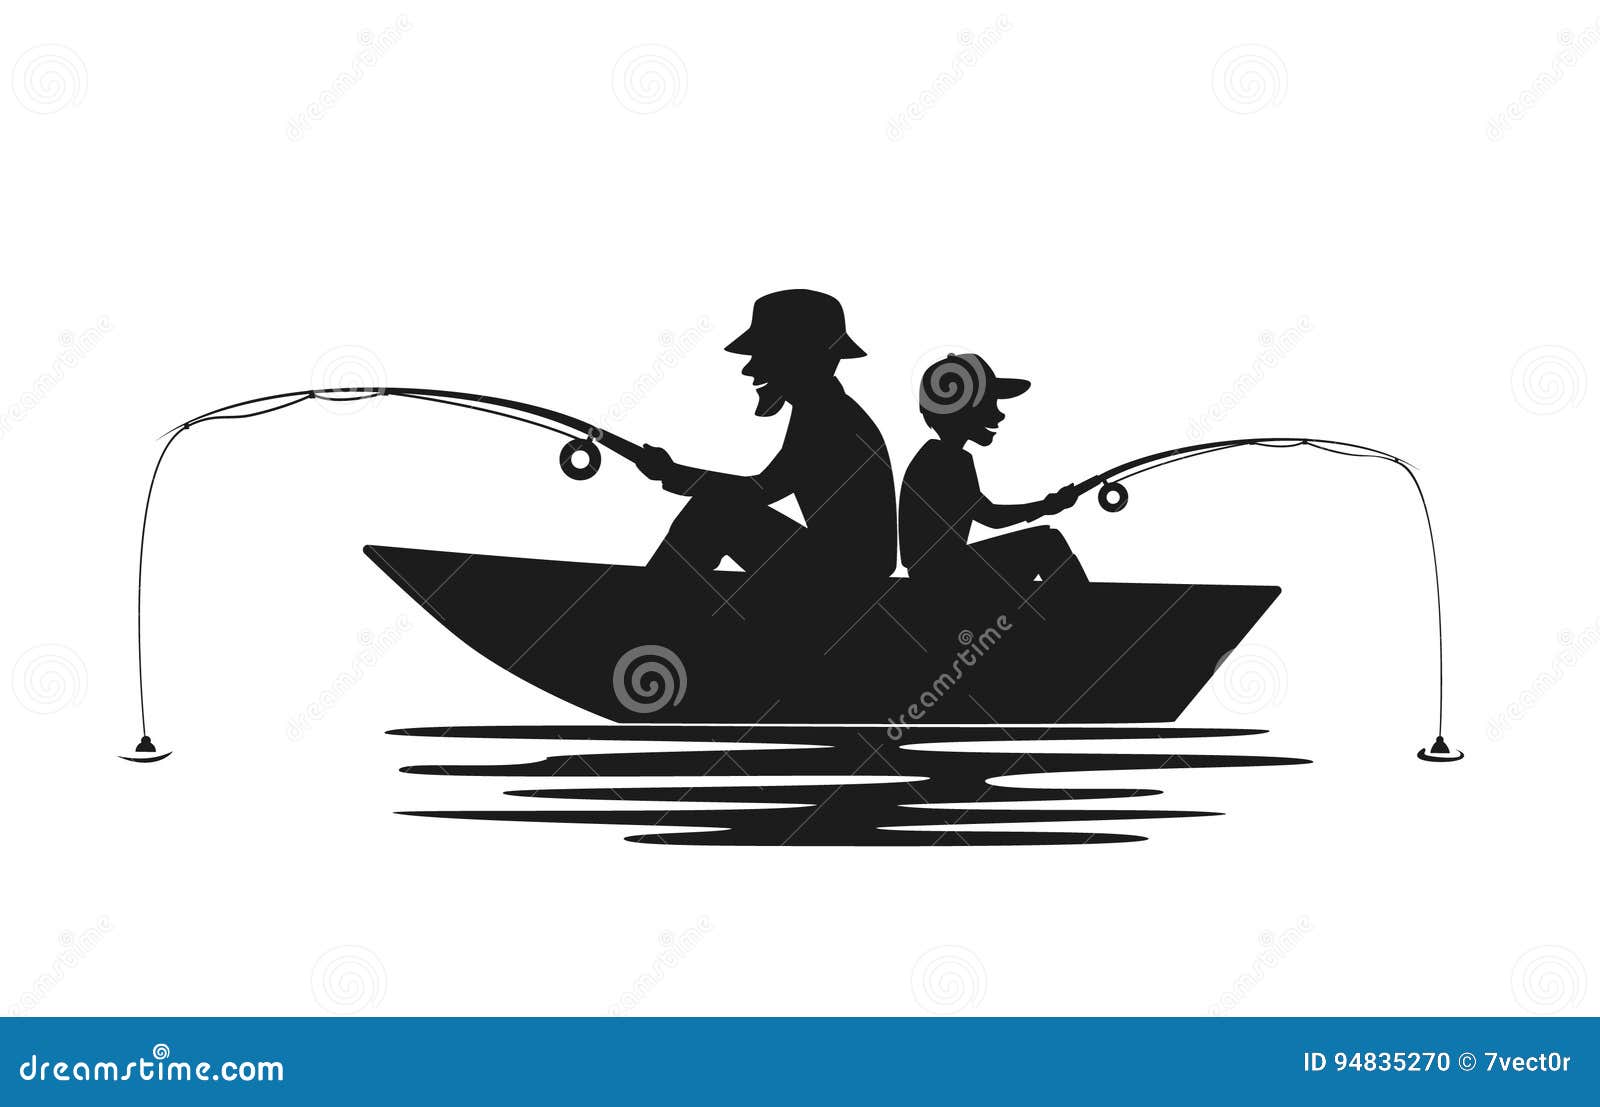 https://thumbs.dreamstime.com/z/father-son-fishing-boat-lake-silhouette-94835270.jpg